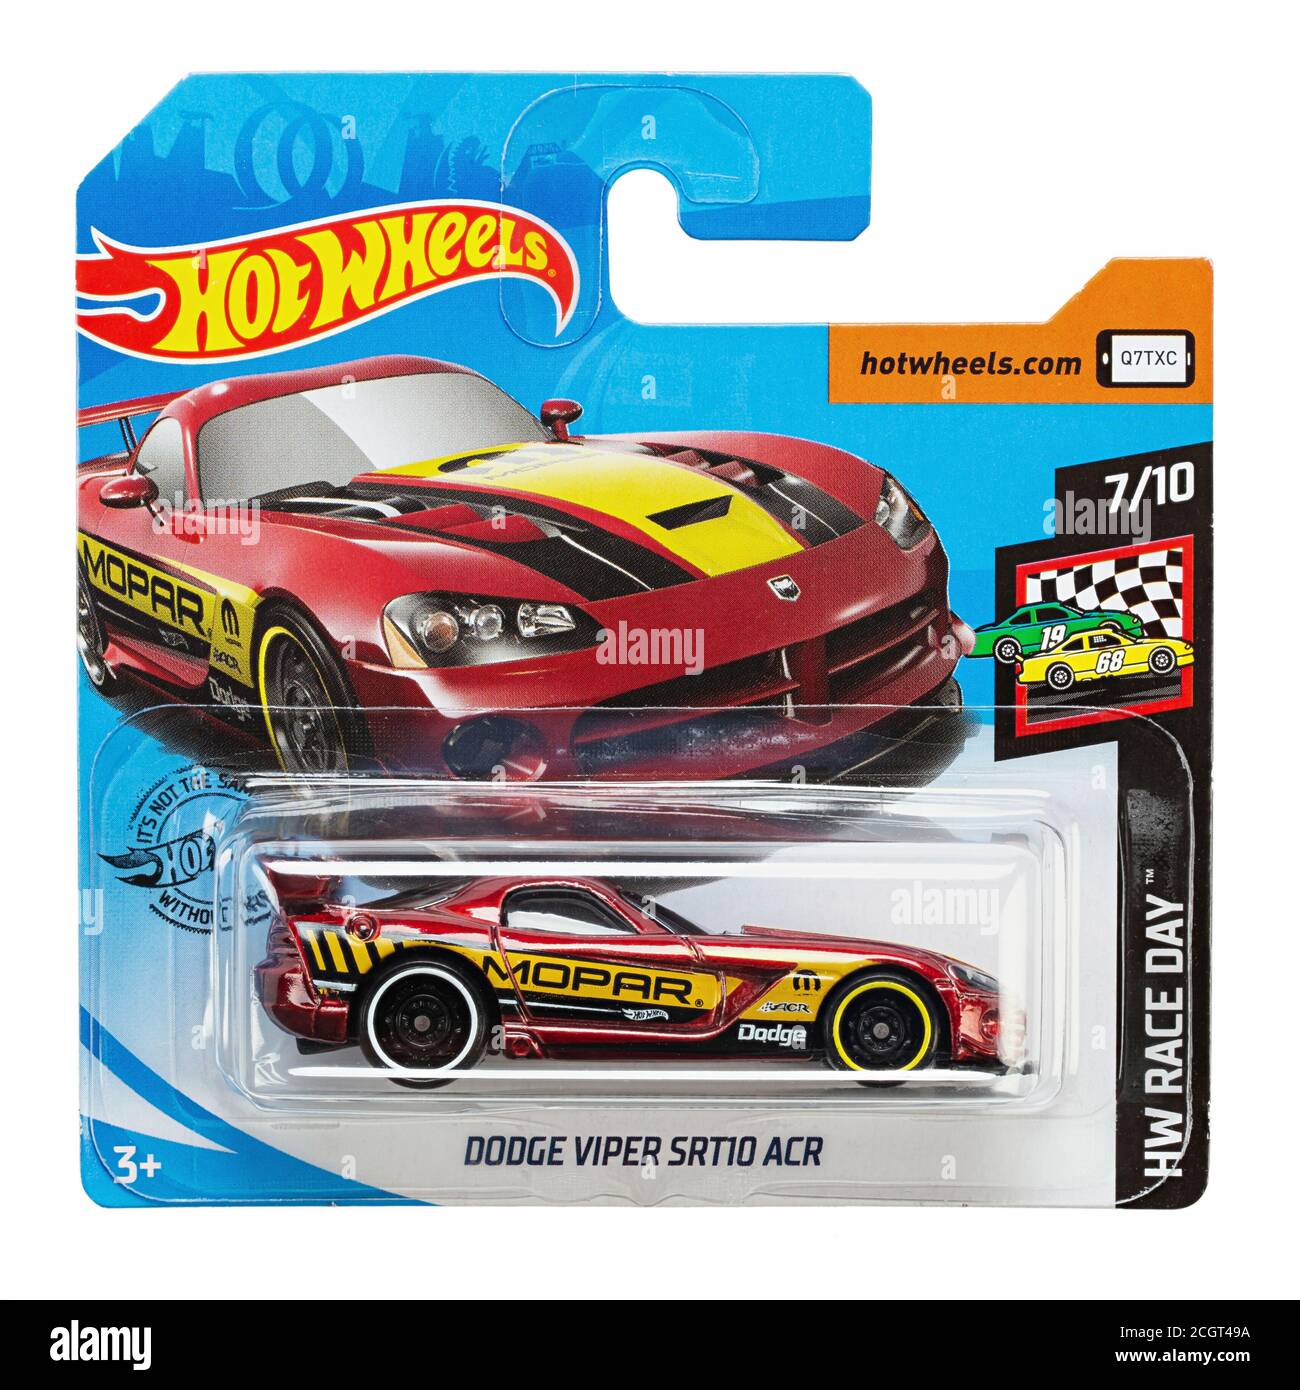 Ukraine, Kyiv - August 26. 2020: Toy car model Dodge Viper srt 10 acr. Hot Wheels is a scale die-cast toy cars by American toy maker Mattel in 1968. F Stock Photo